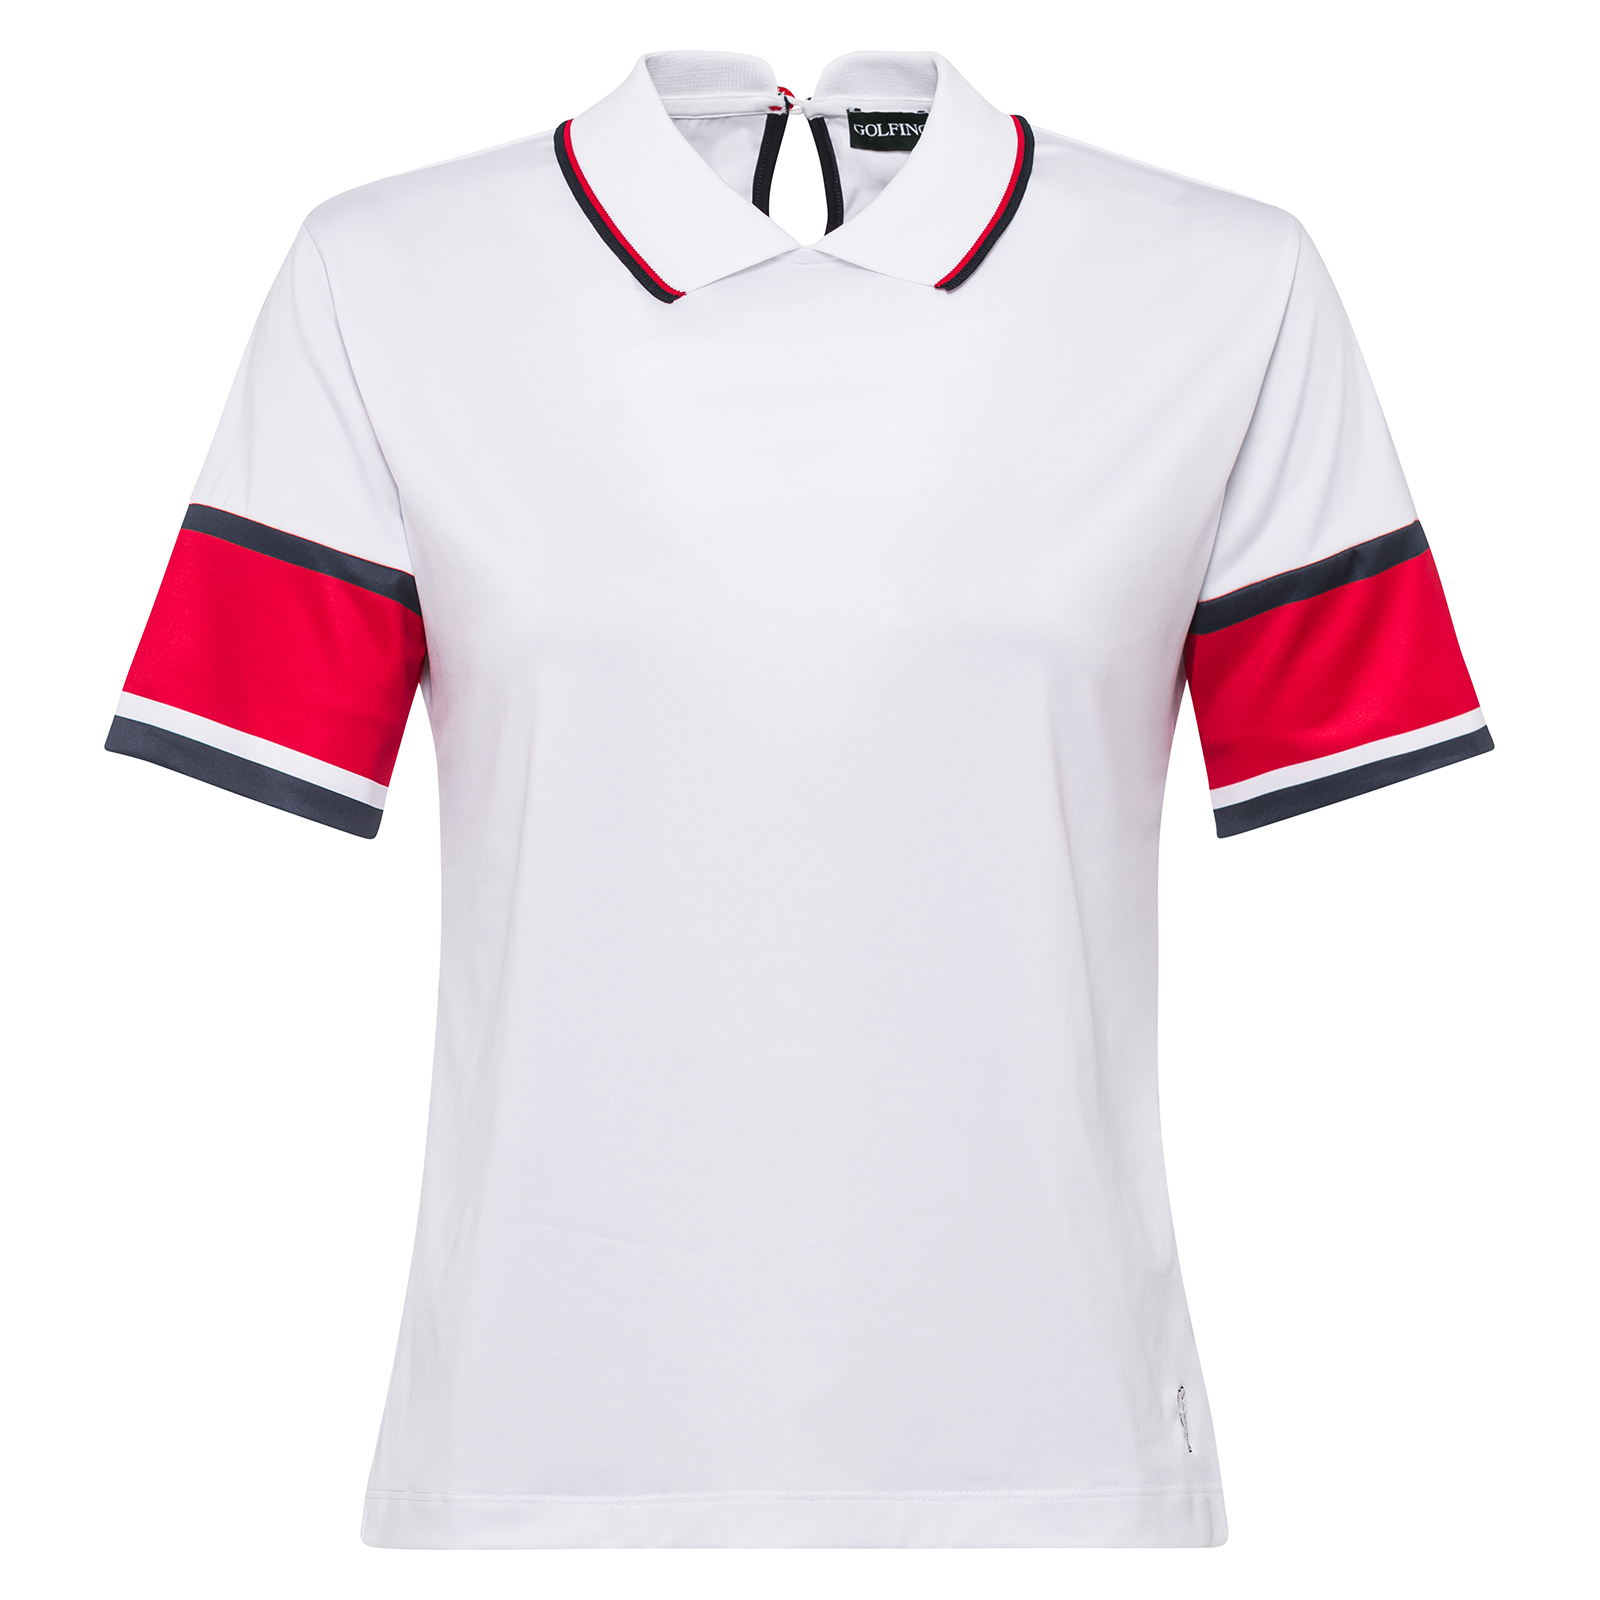 Fashionable ladies' golf polo shirt with back closing collar 